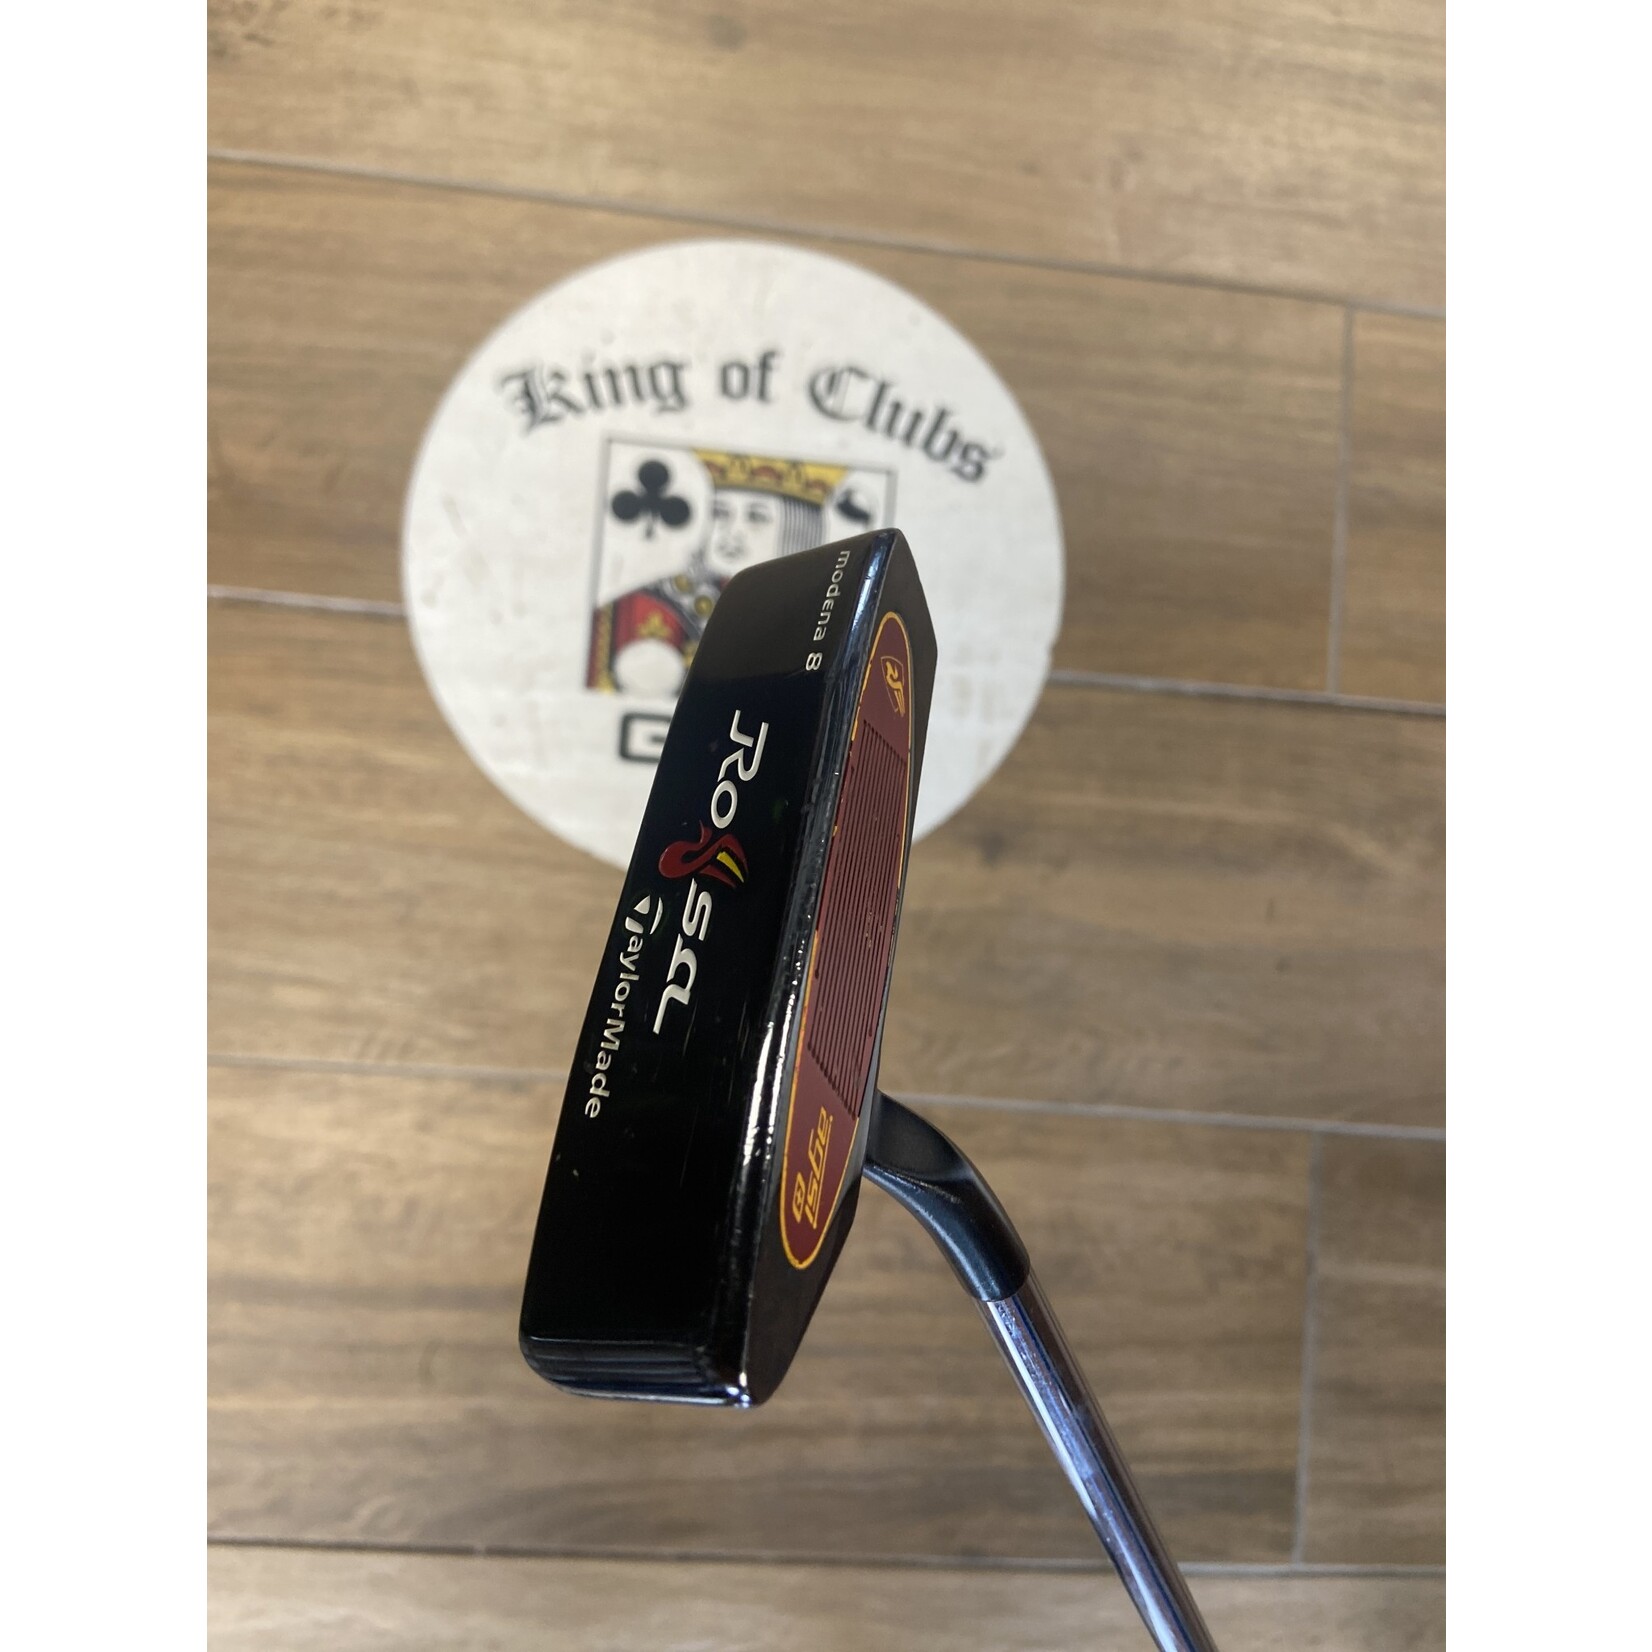 TAYLORMADE Used Taylormade Rossa Modena 8 Putter RH